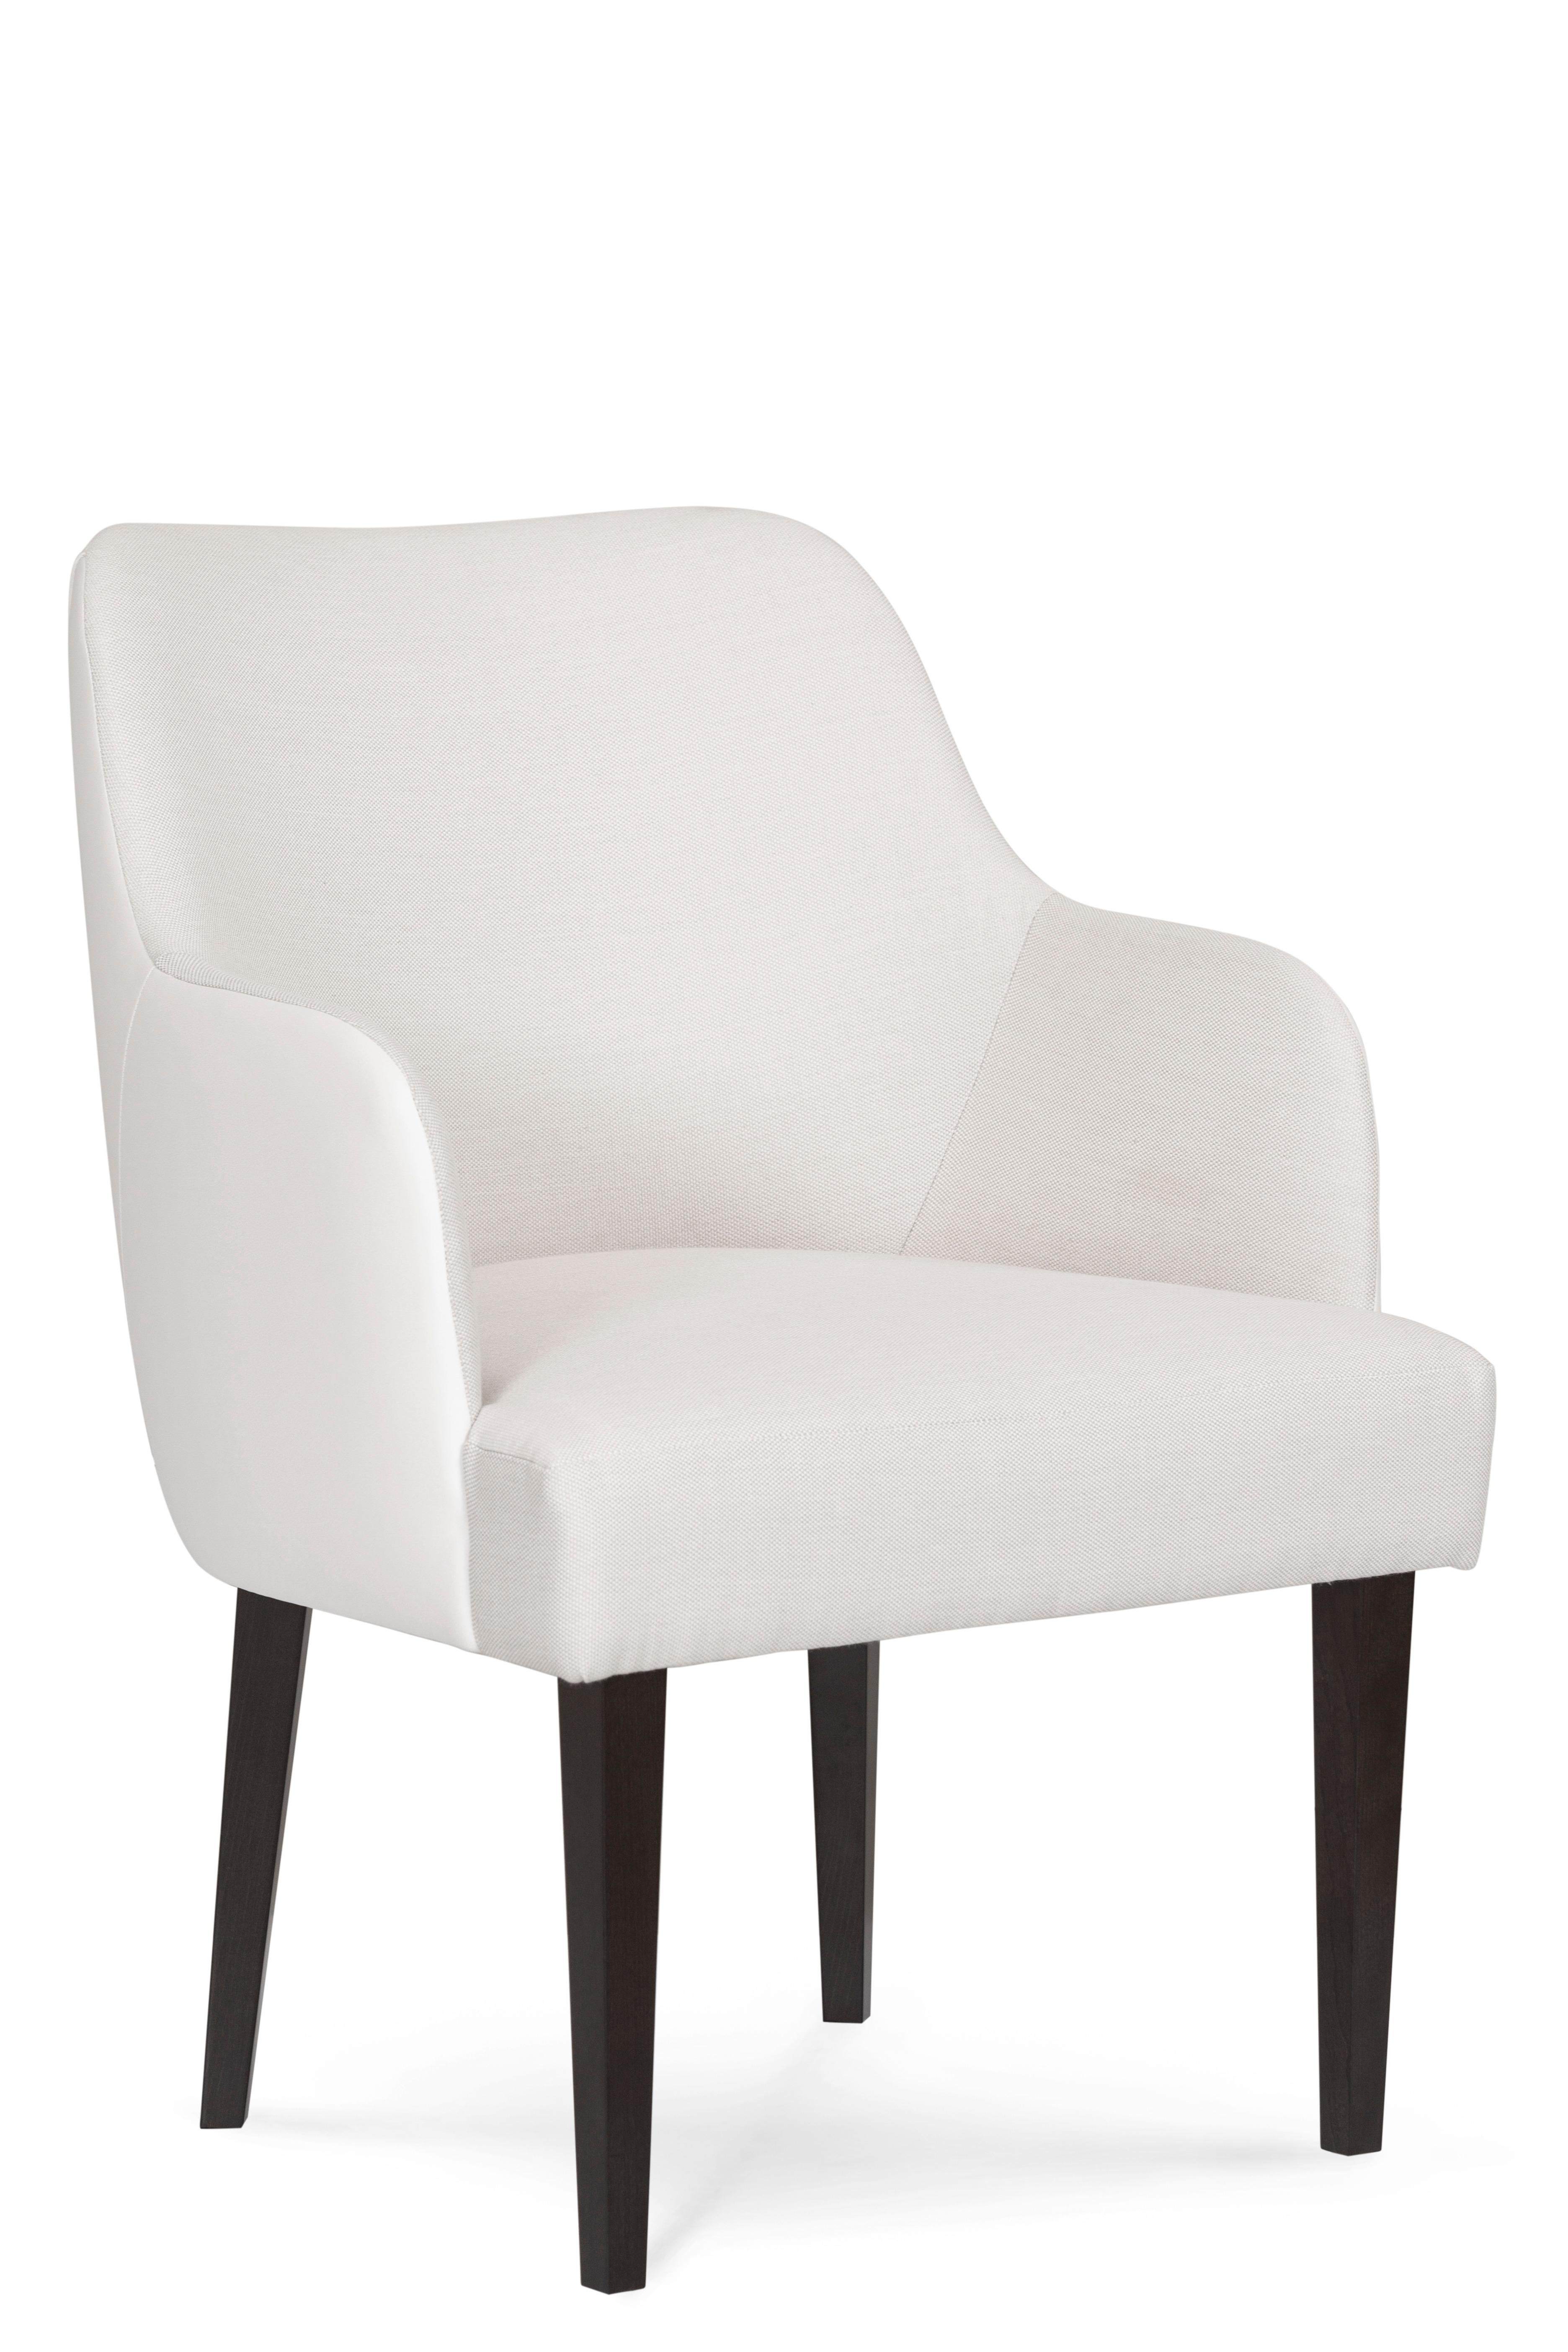 modern white leather dining chairs